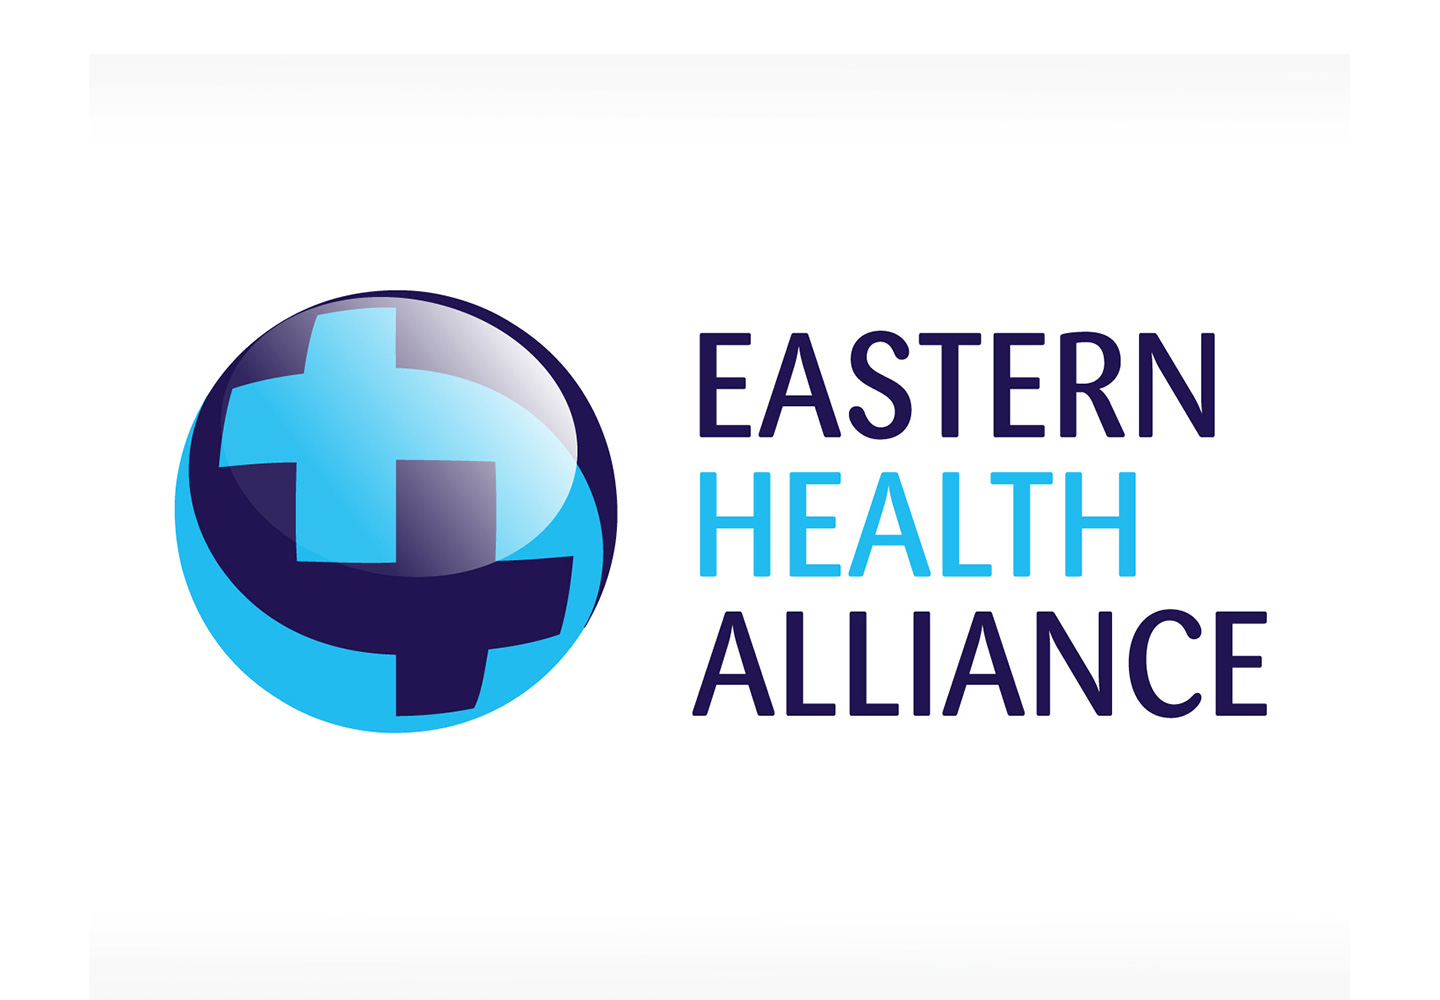 Brand Consultancy in Healthcare Industry. Logo design for Eastern Health Alliance.